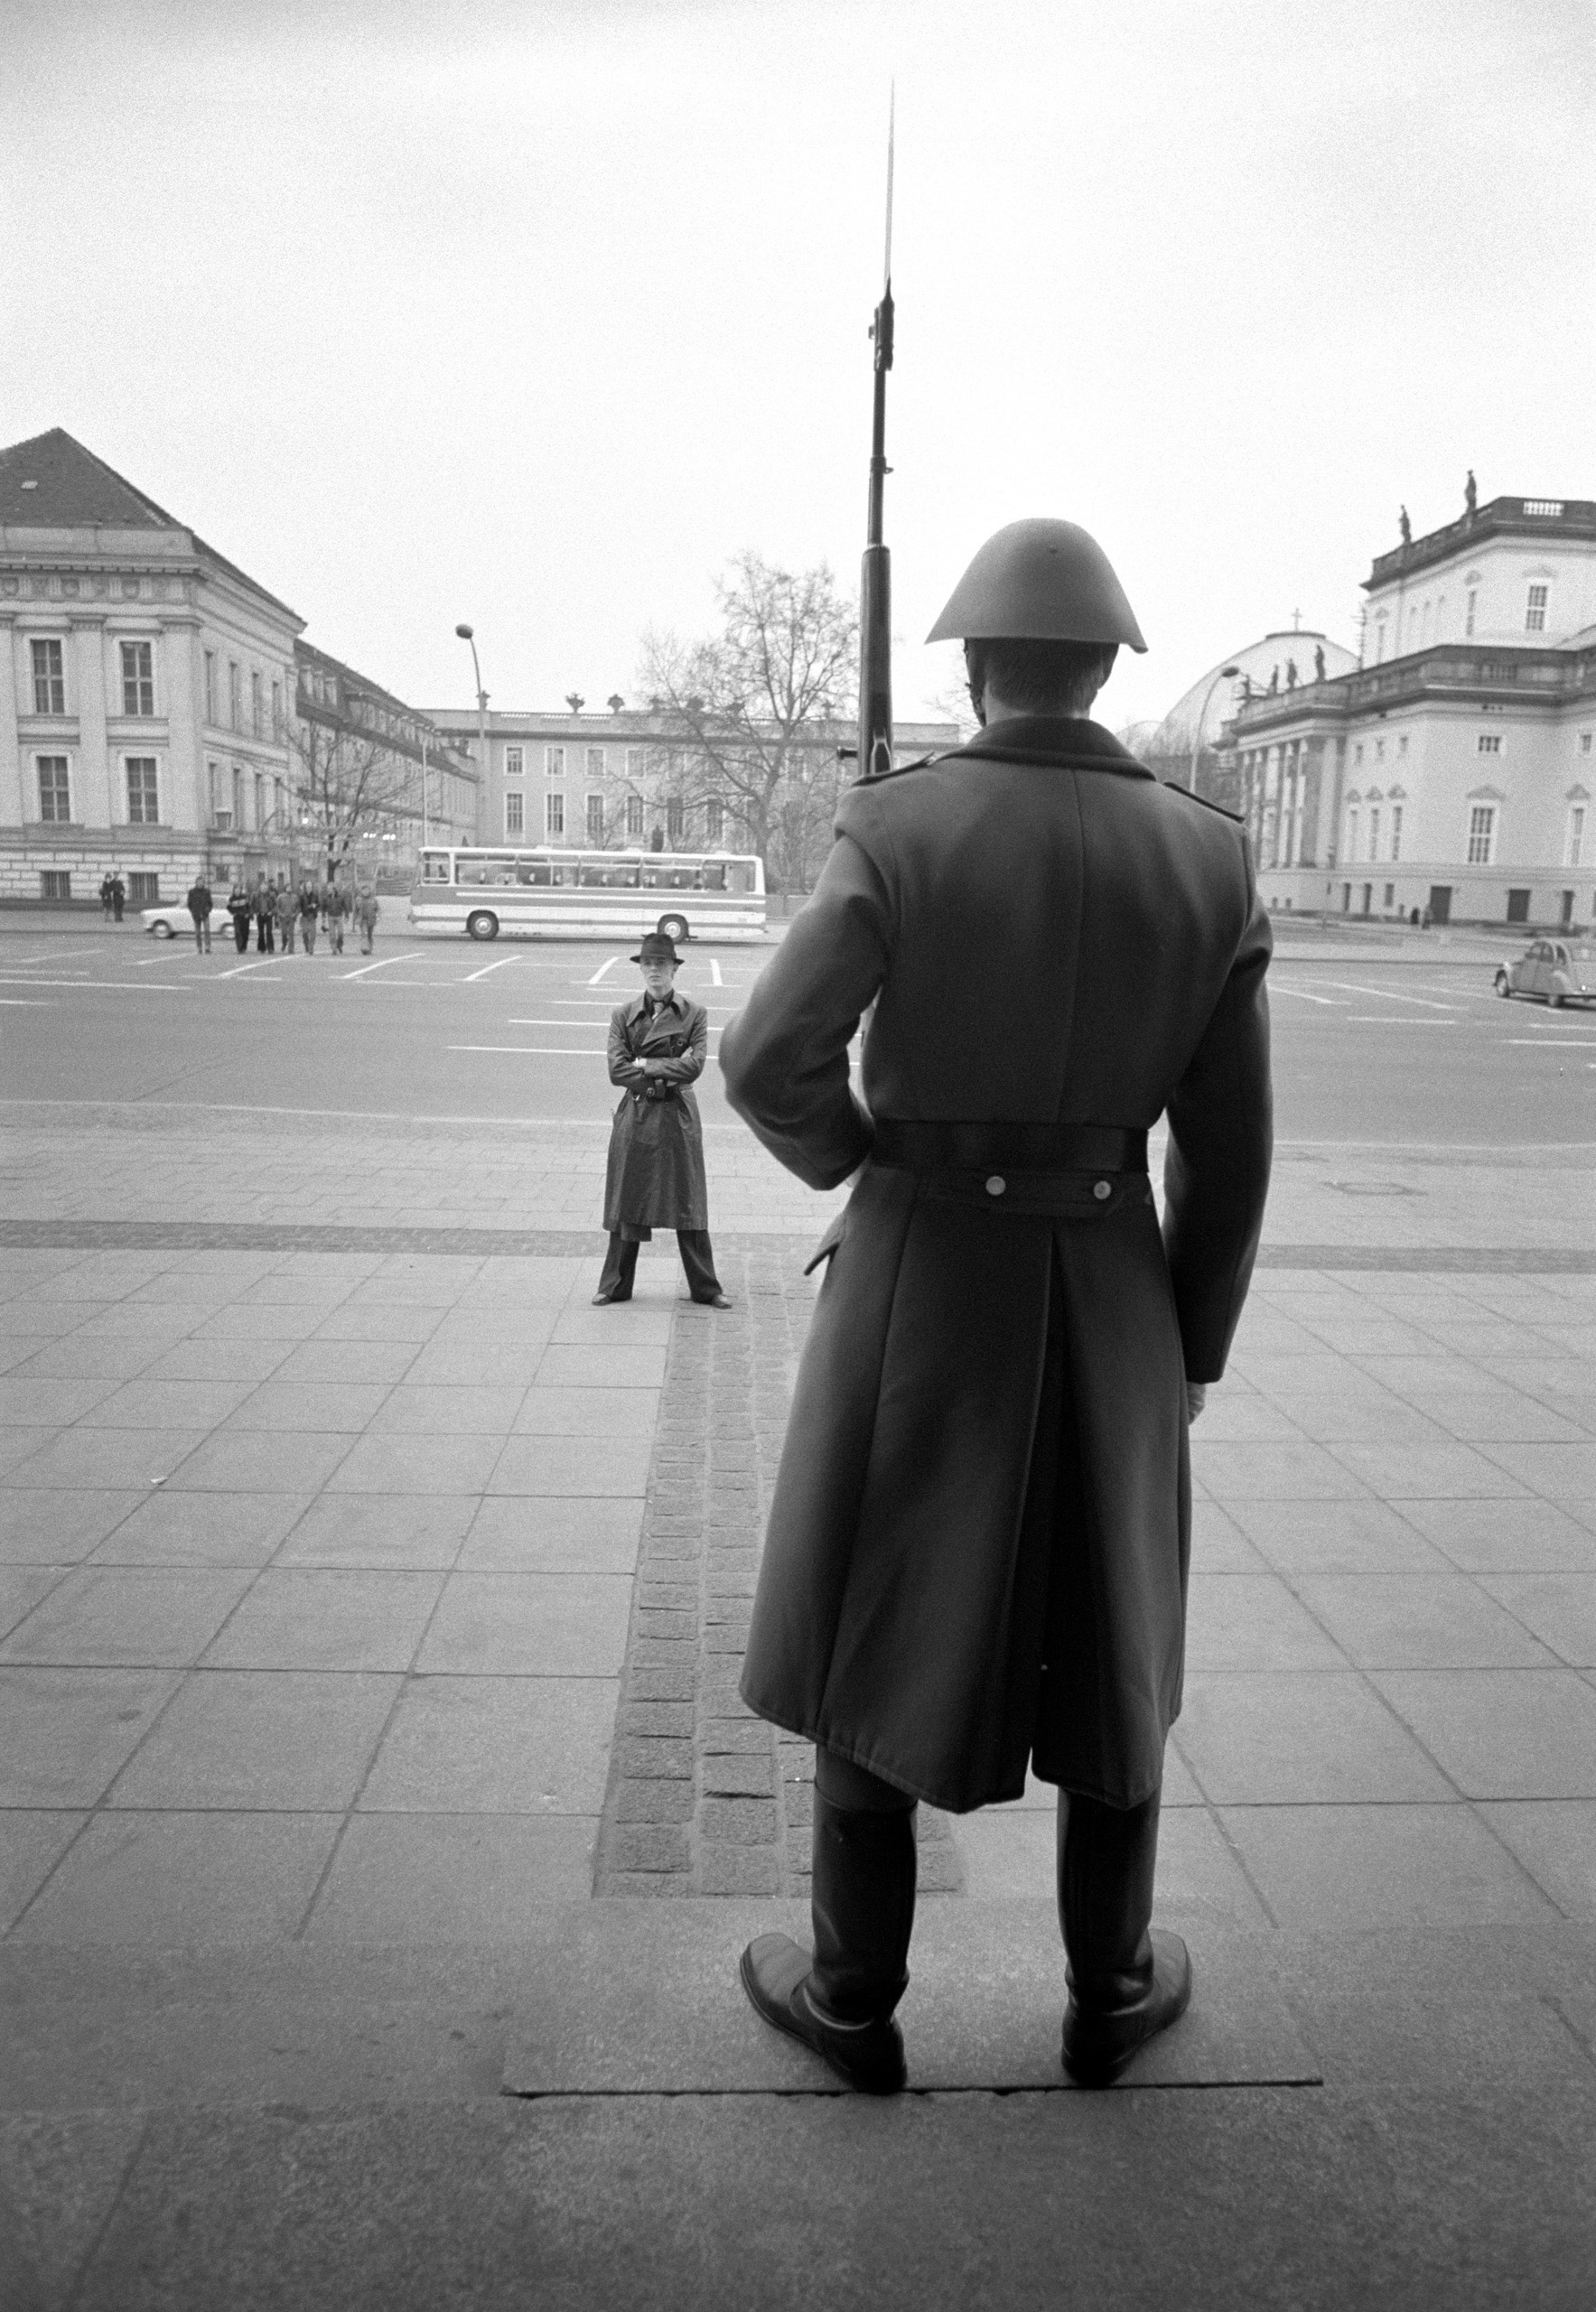 Bowie pauses in front of an armed guard, during a walk around East Berlin, 1976.